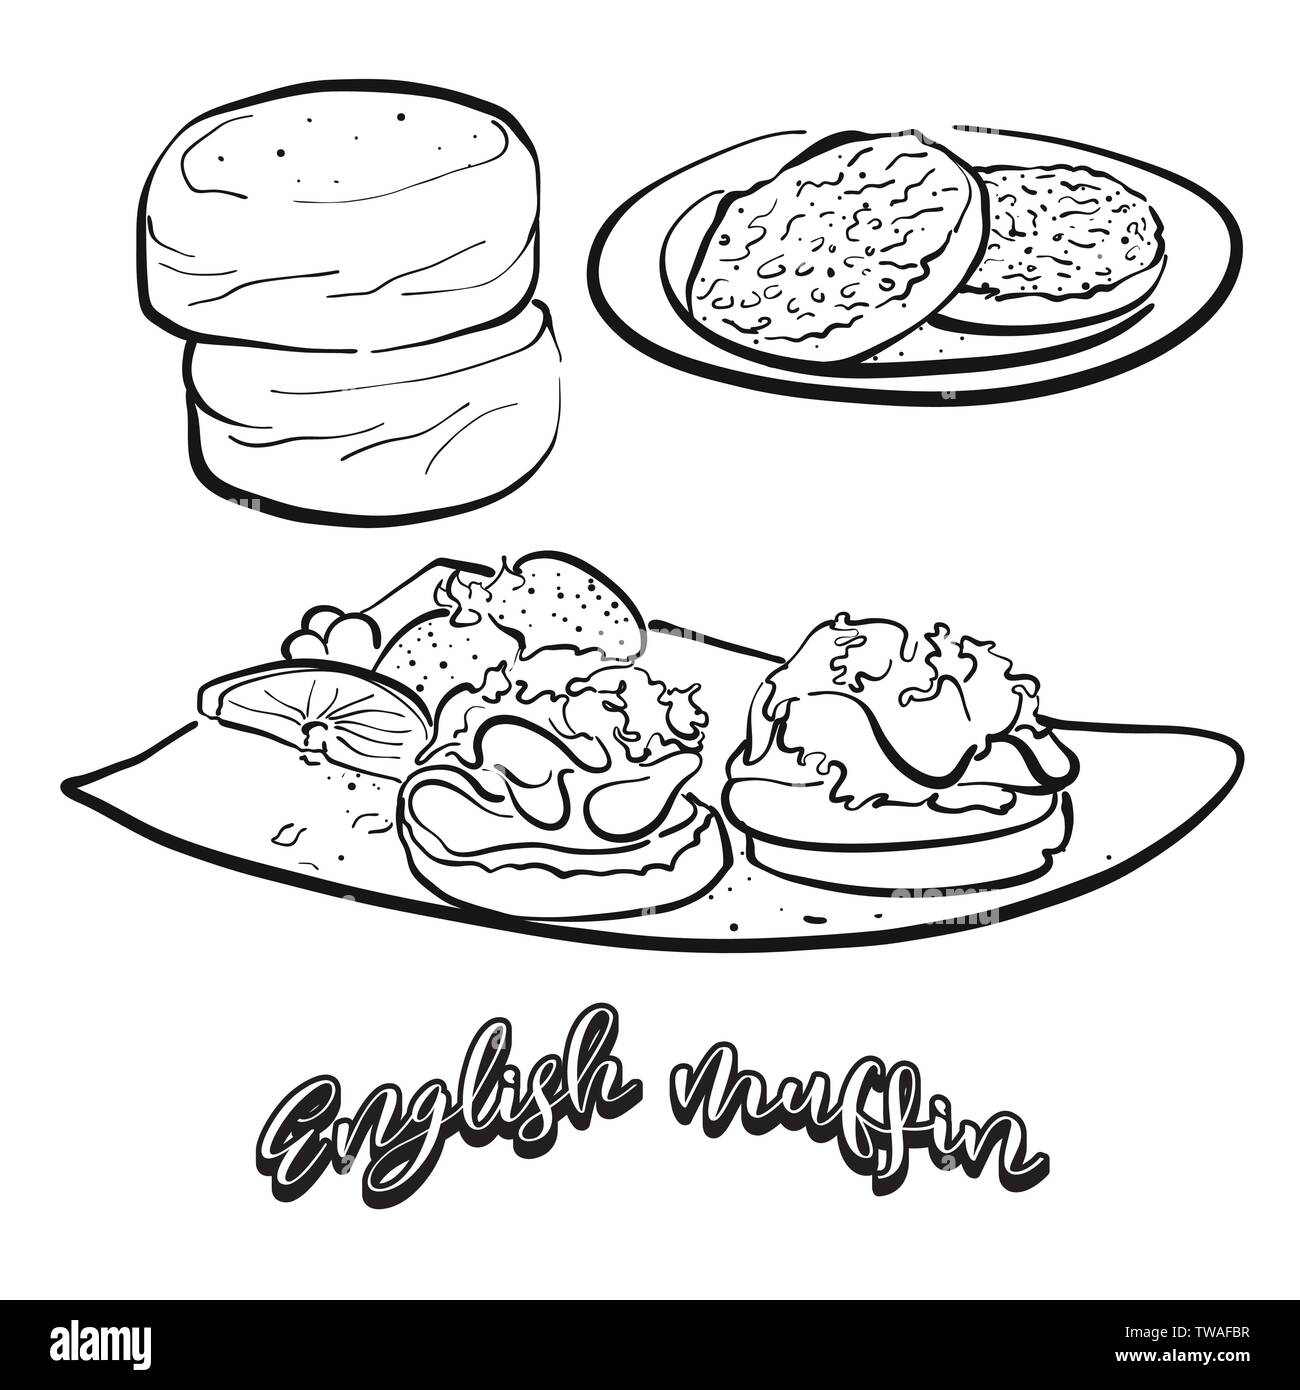 English muffin food sketch on chalkboard. Vector drawing of Yeast bread, usually known in United Kingdom. Food illustration series. Stock Vector